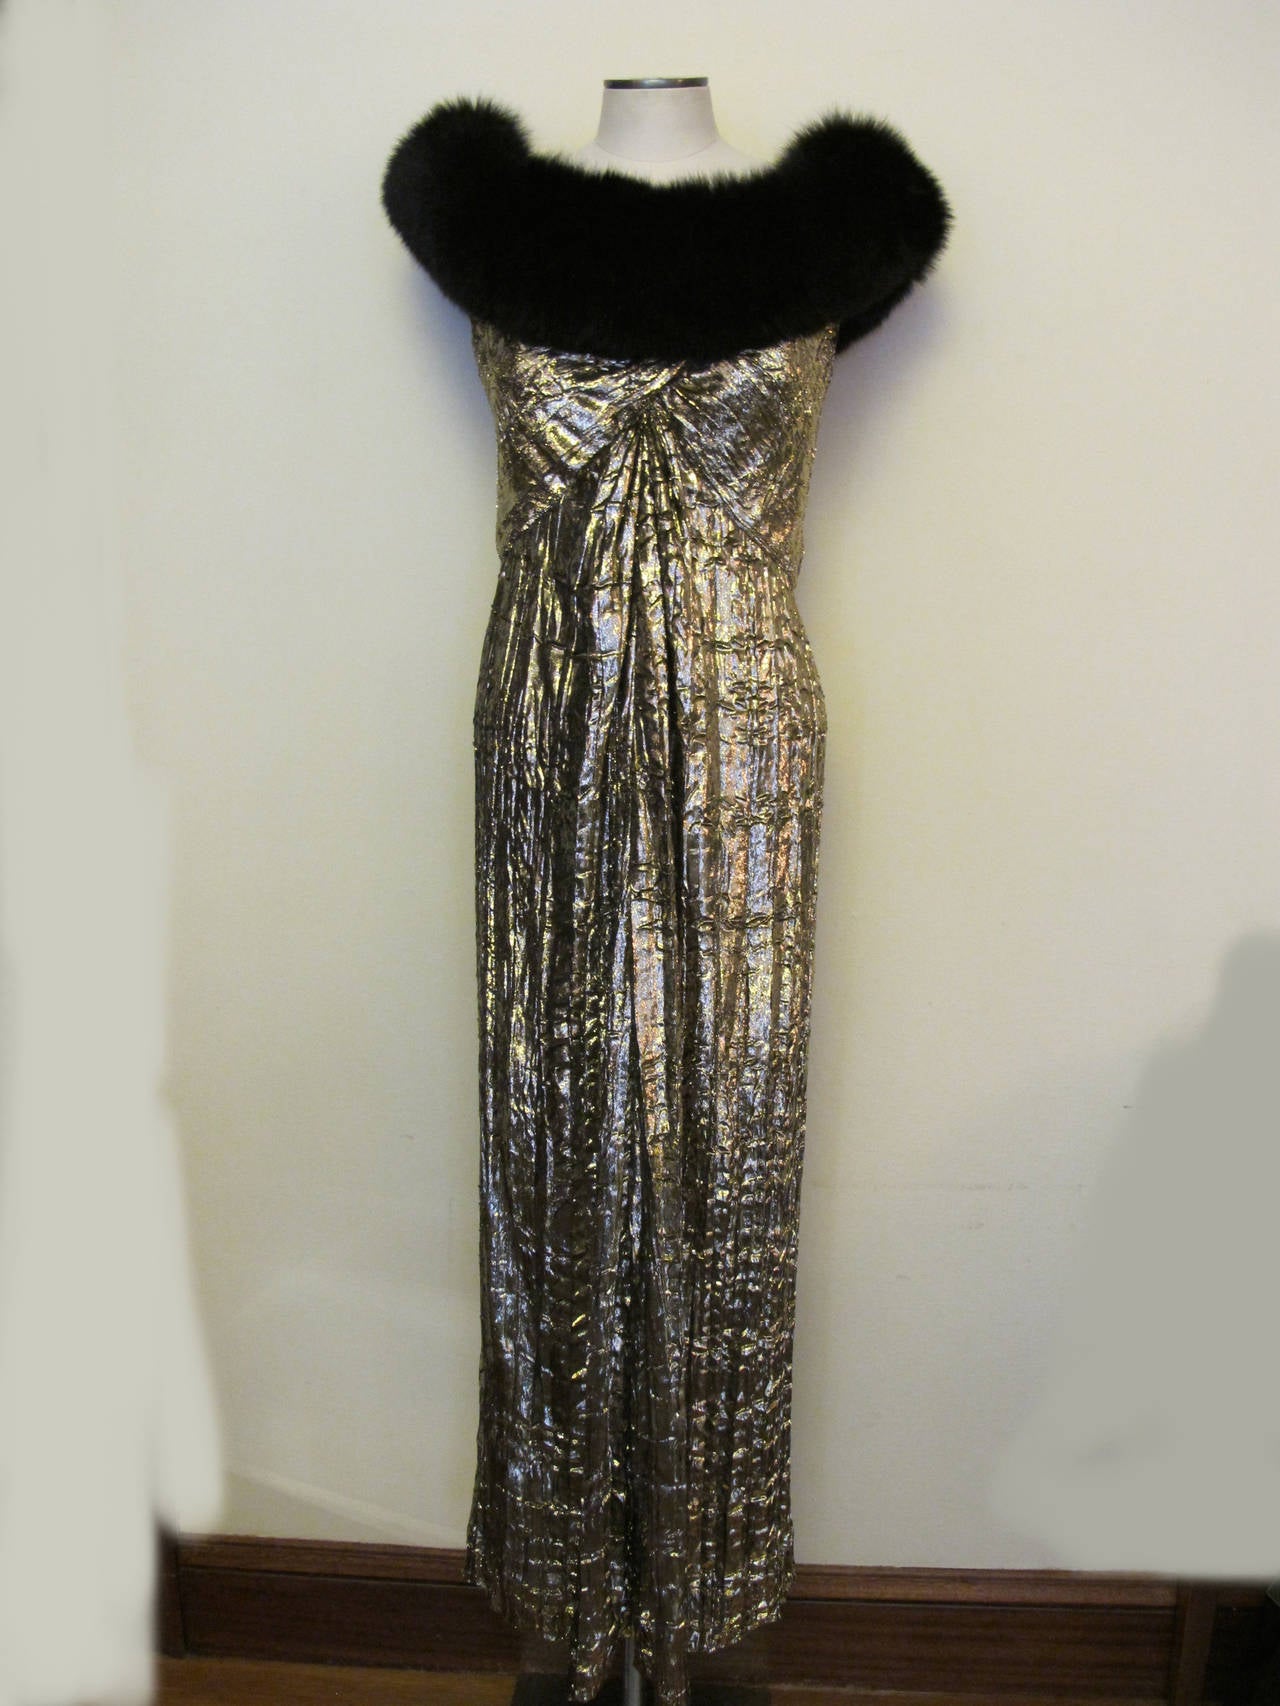 Bob Mackie's luscious gown is captured with flattened pile and the 6 inch fox collar that circles the front and back of the gown. The boning and built in bra contributes to the structure and integrity of this elegant statement piece. 1990's I.